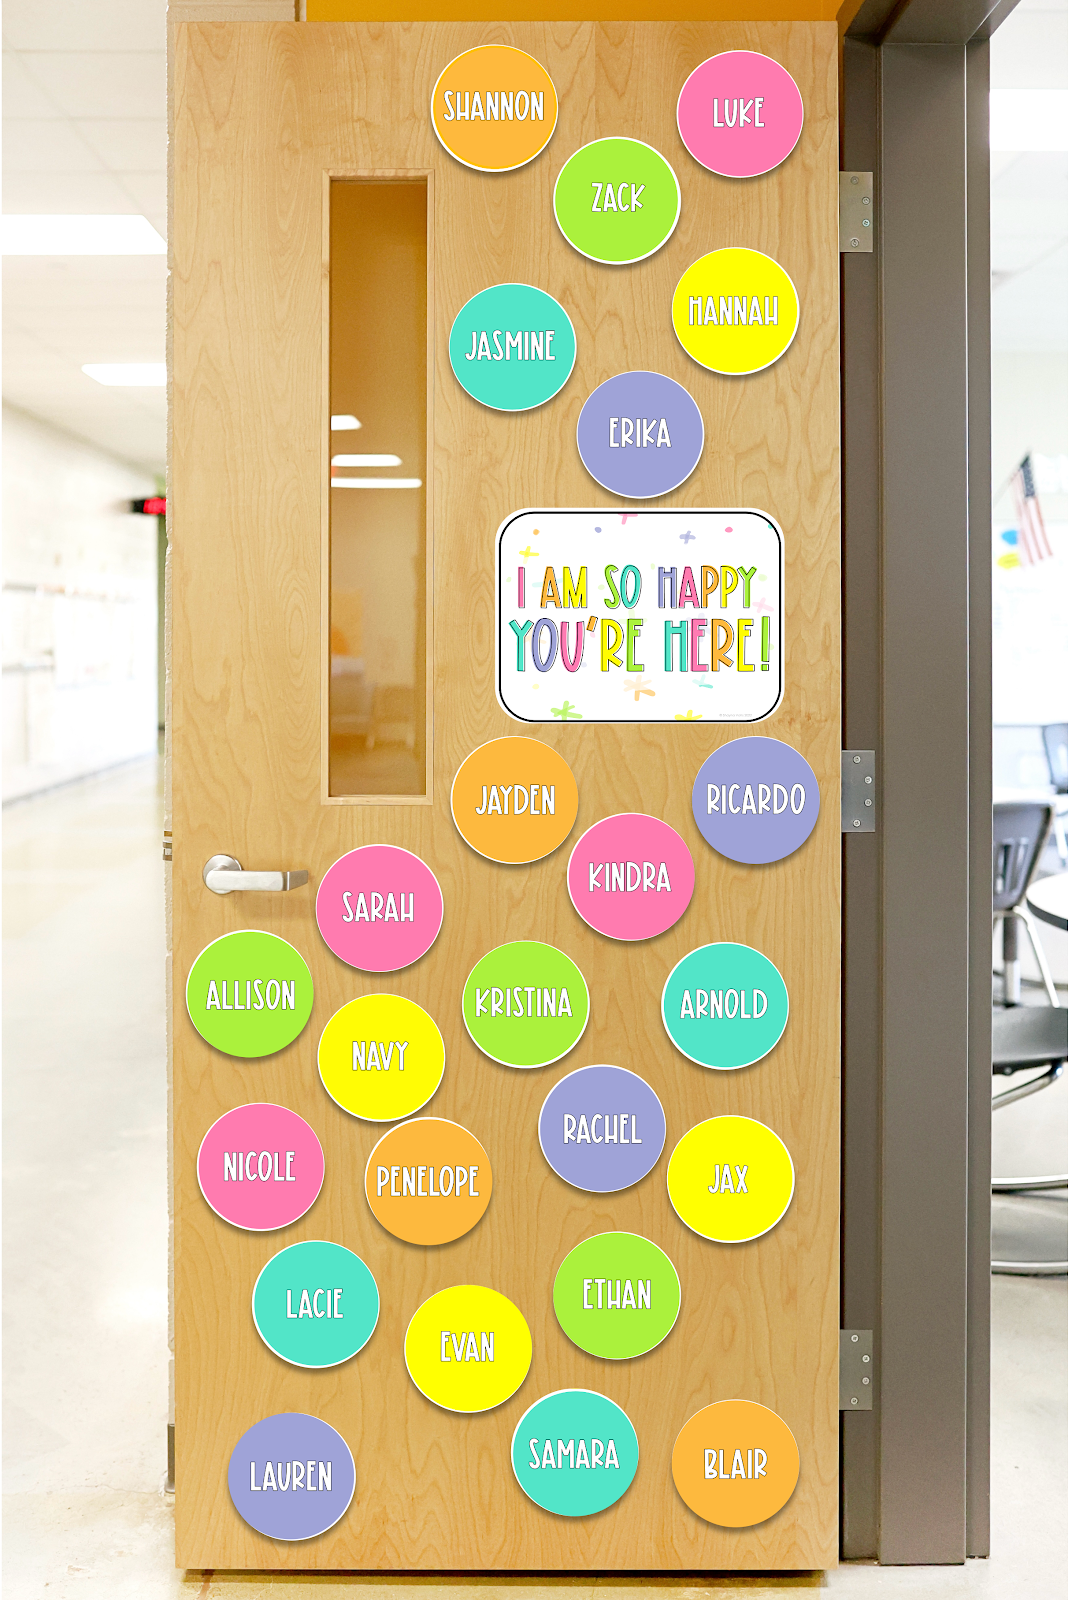 This image shows a classroom door decorated with bright, colorful circles. Each circle reads a student's name. In the middle of the door is a poster that reads "I am so happy you're here!" 